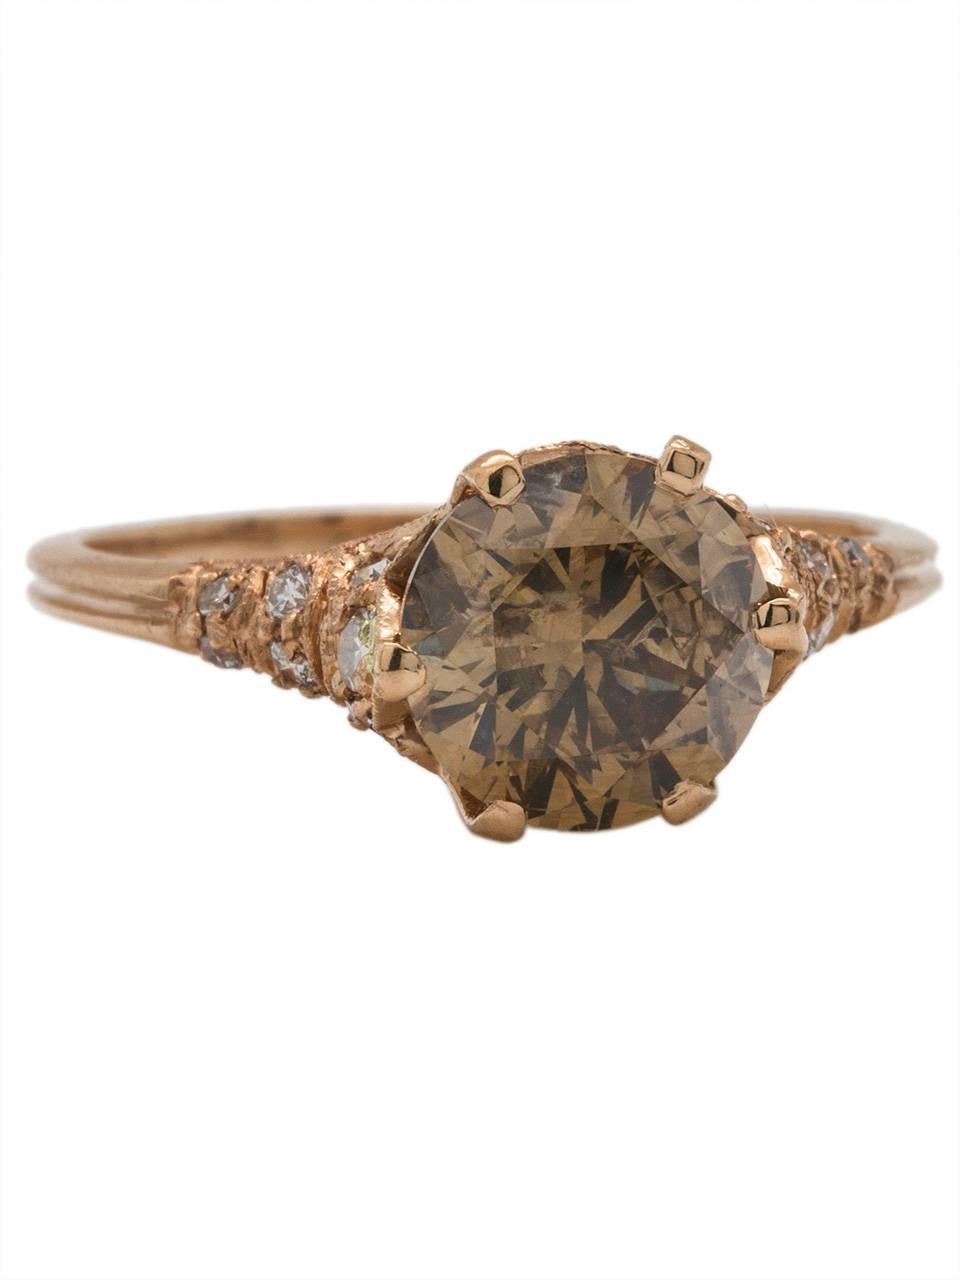 This luscious 18k Rose gold pave diamond ring is set with a stunning 1.85ct Cognac brown round brilliant center diamond, I2 clarity. Sixteen stunningly bright pave-set full cut white side diamonds encompass the sides and shank of this gorgeous